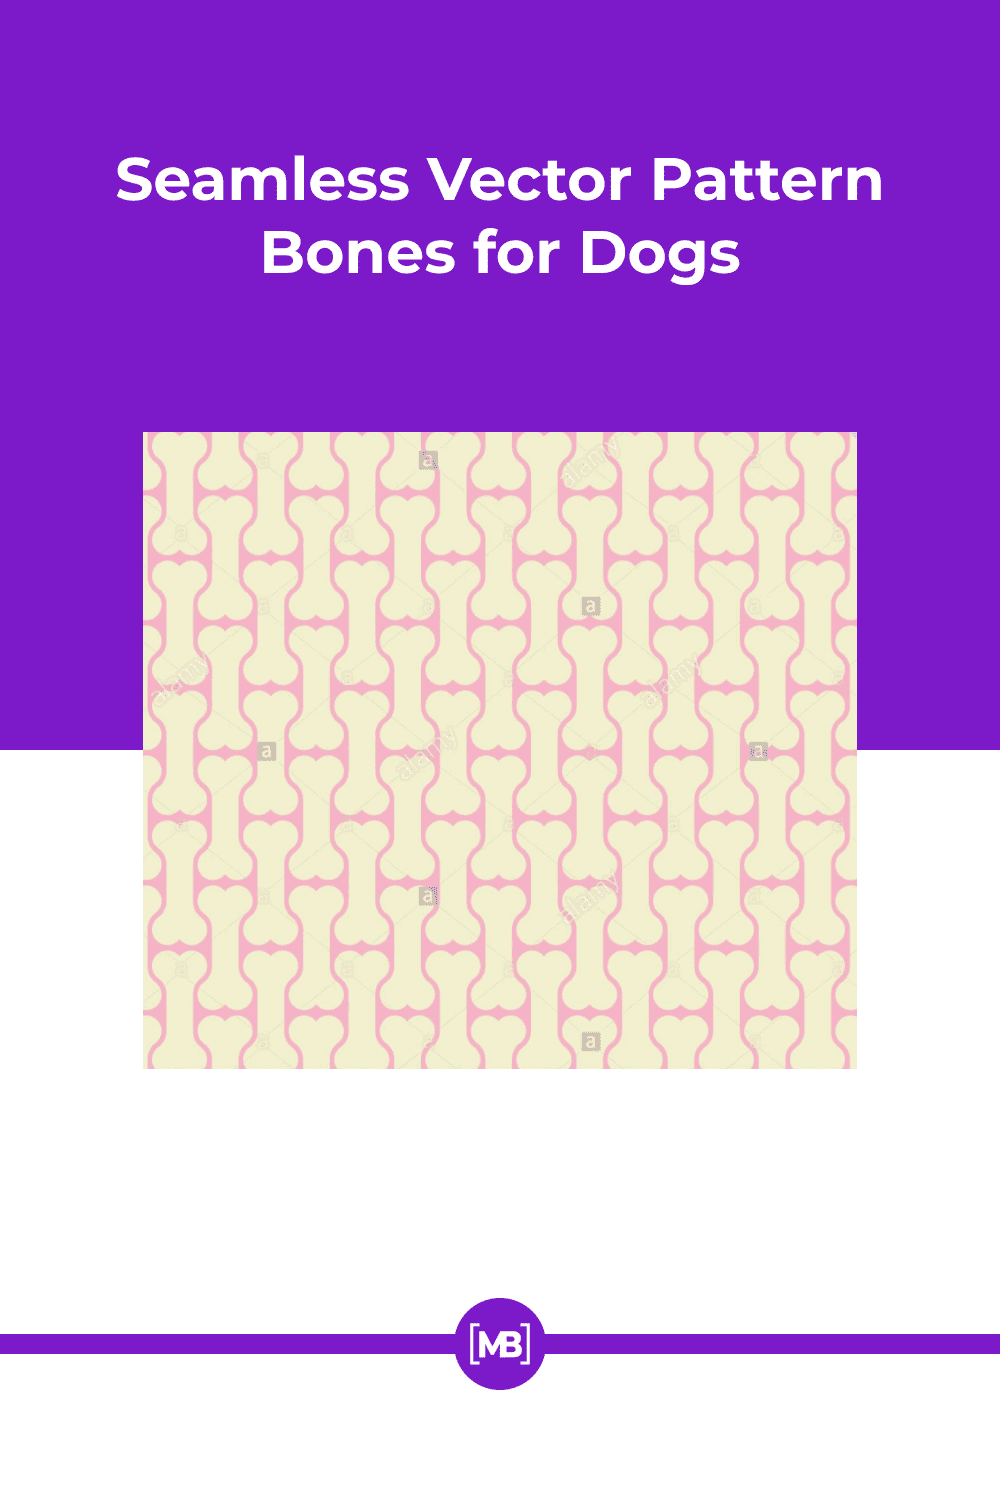 Seamless vector pattern bones for dogs.